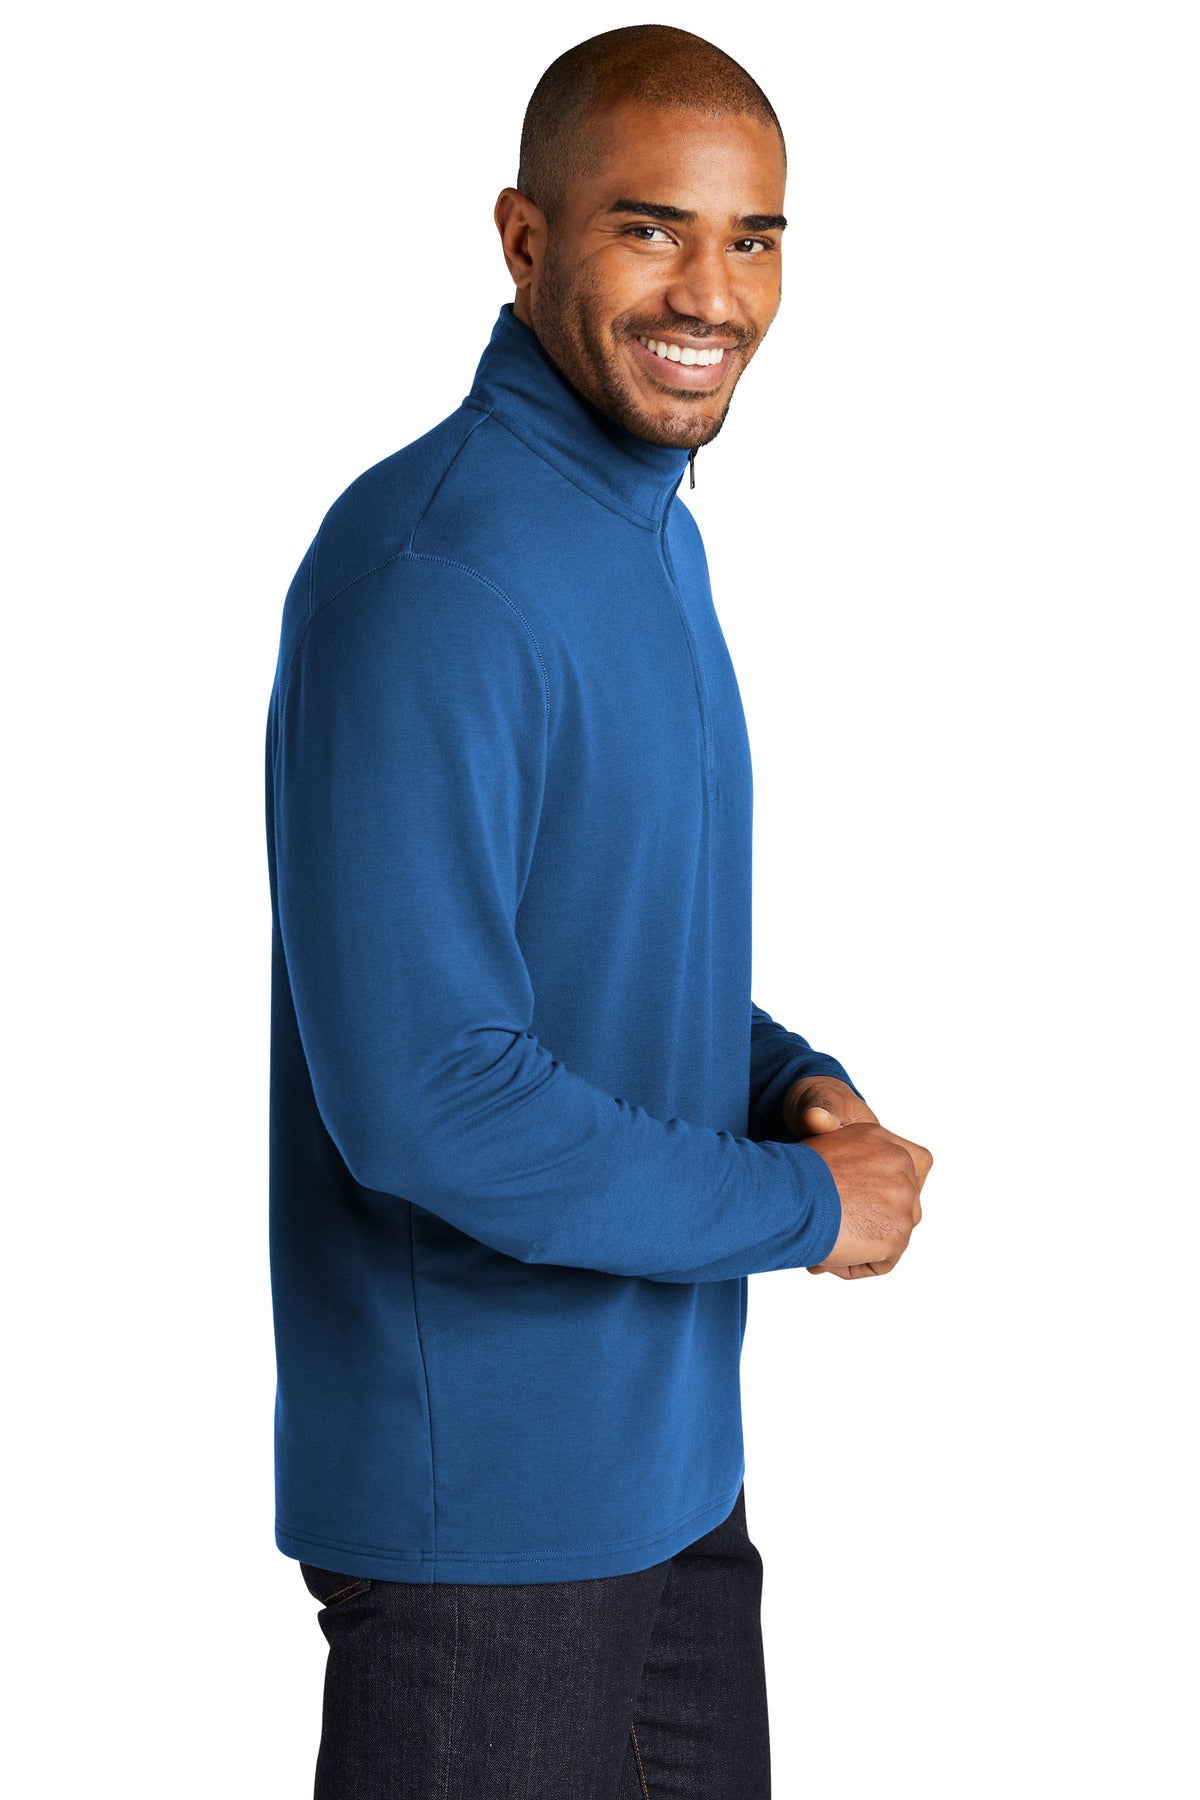 Port Authority® Microterry 1/4-Zip Pullover K825 - DFW Impression